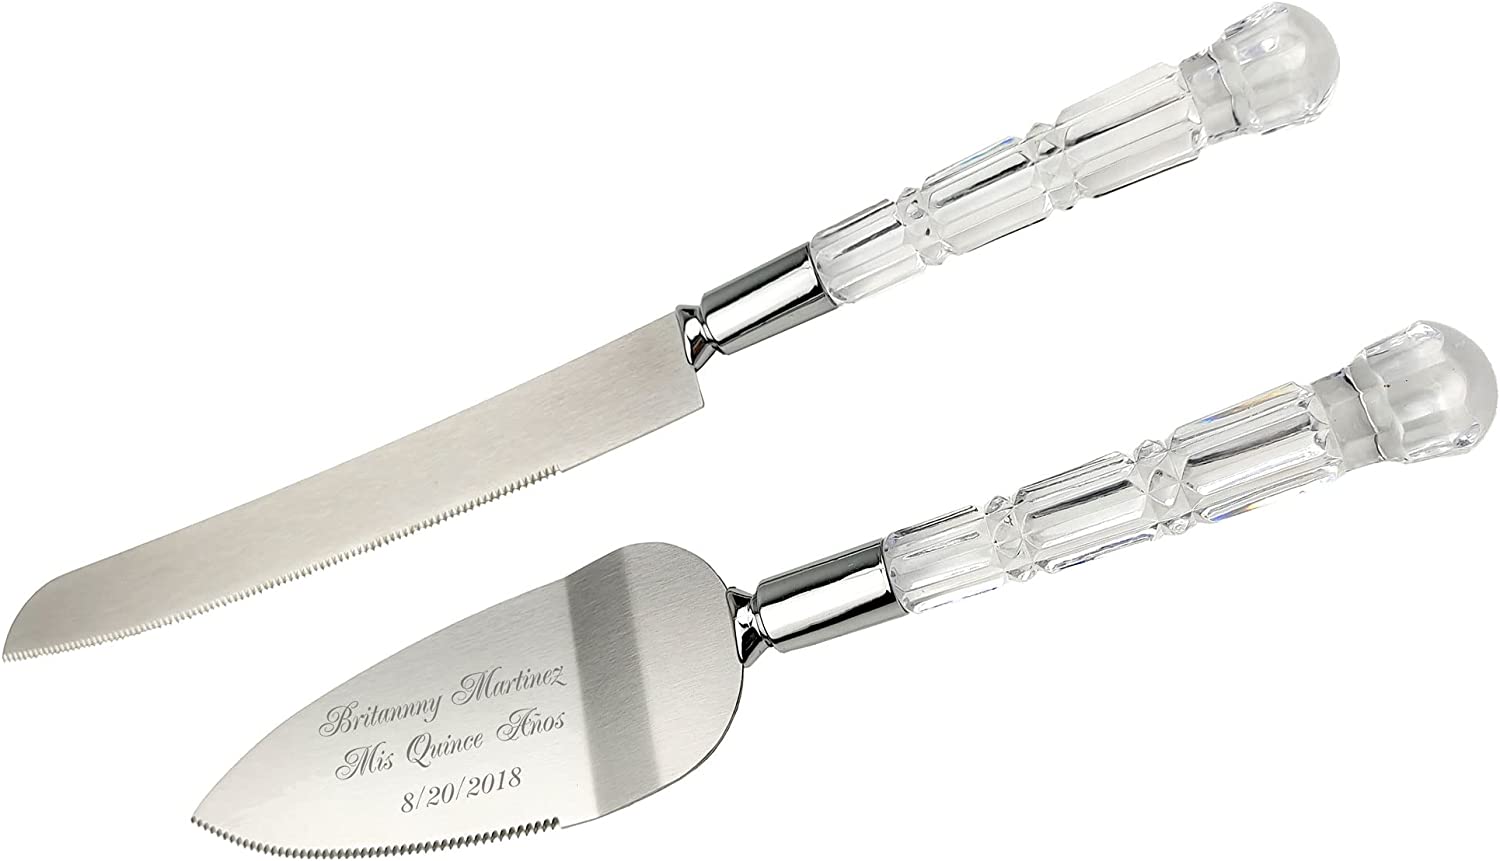 GIFTS INFINITY Personalized Mis Quince Anos Wedding Cake Knife and Server Set Free Engraving